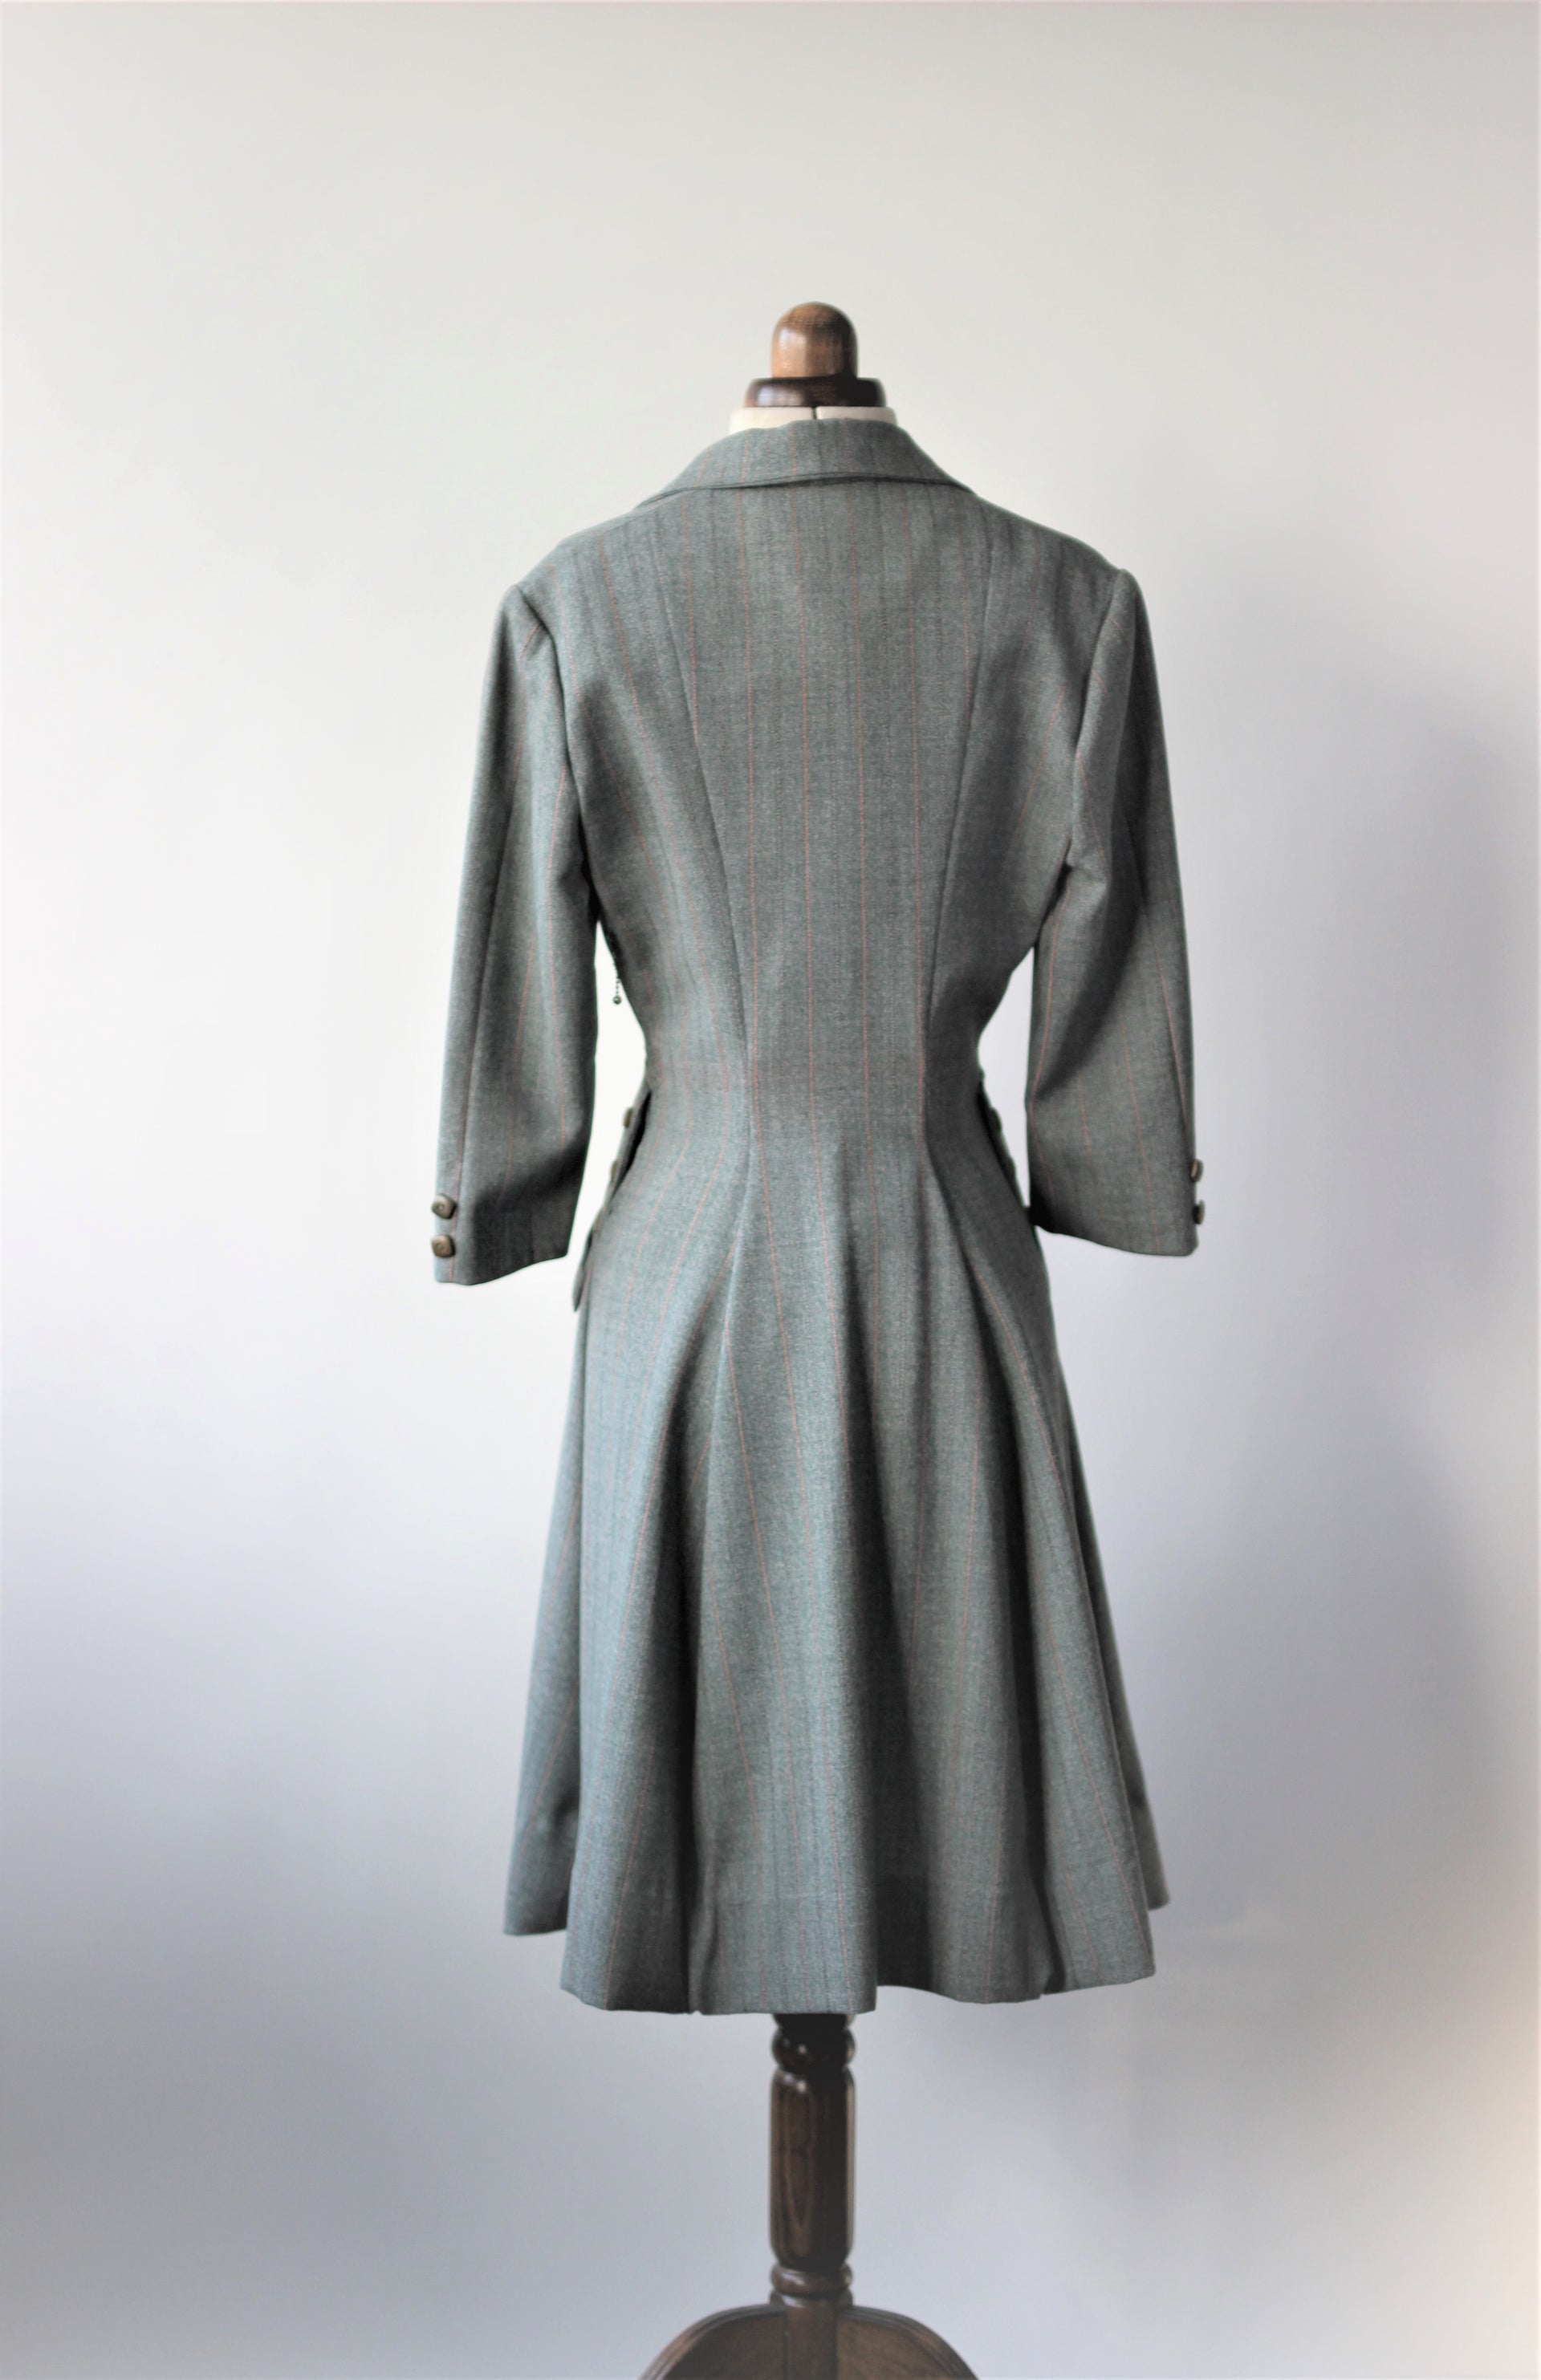 RARE 1940s Wool dress in Grey with Pink Stripes//Size M